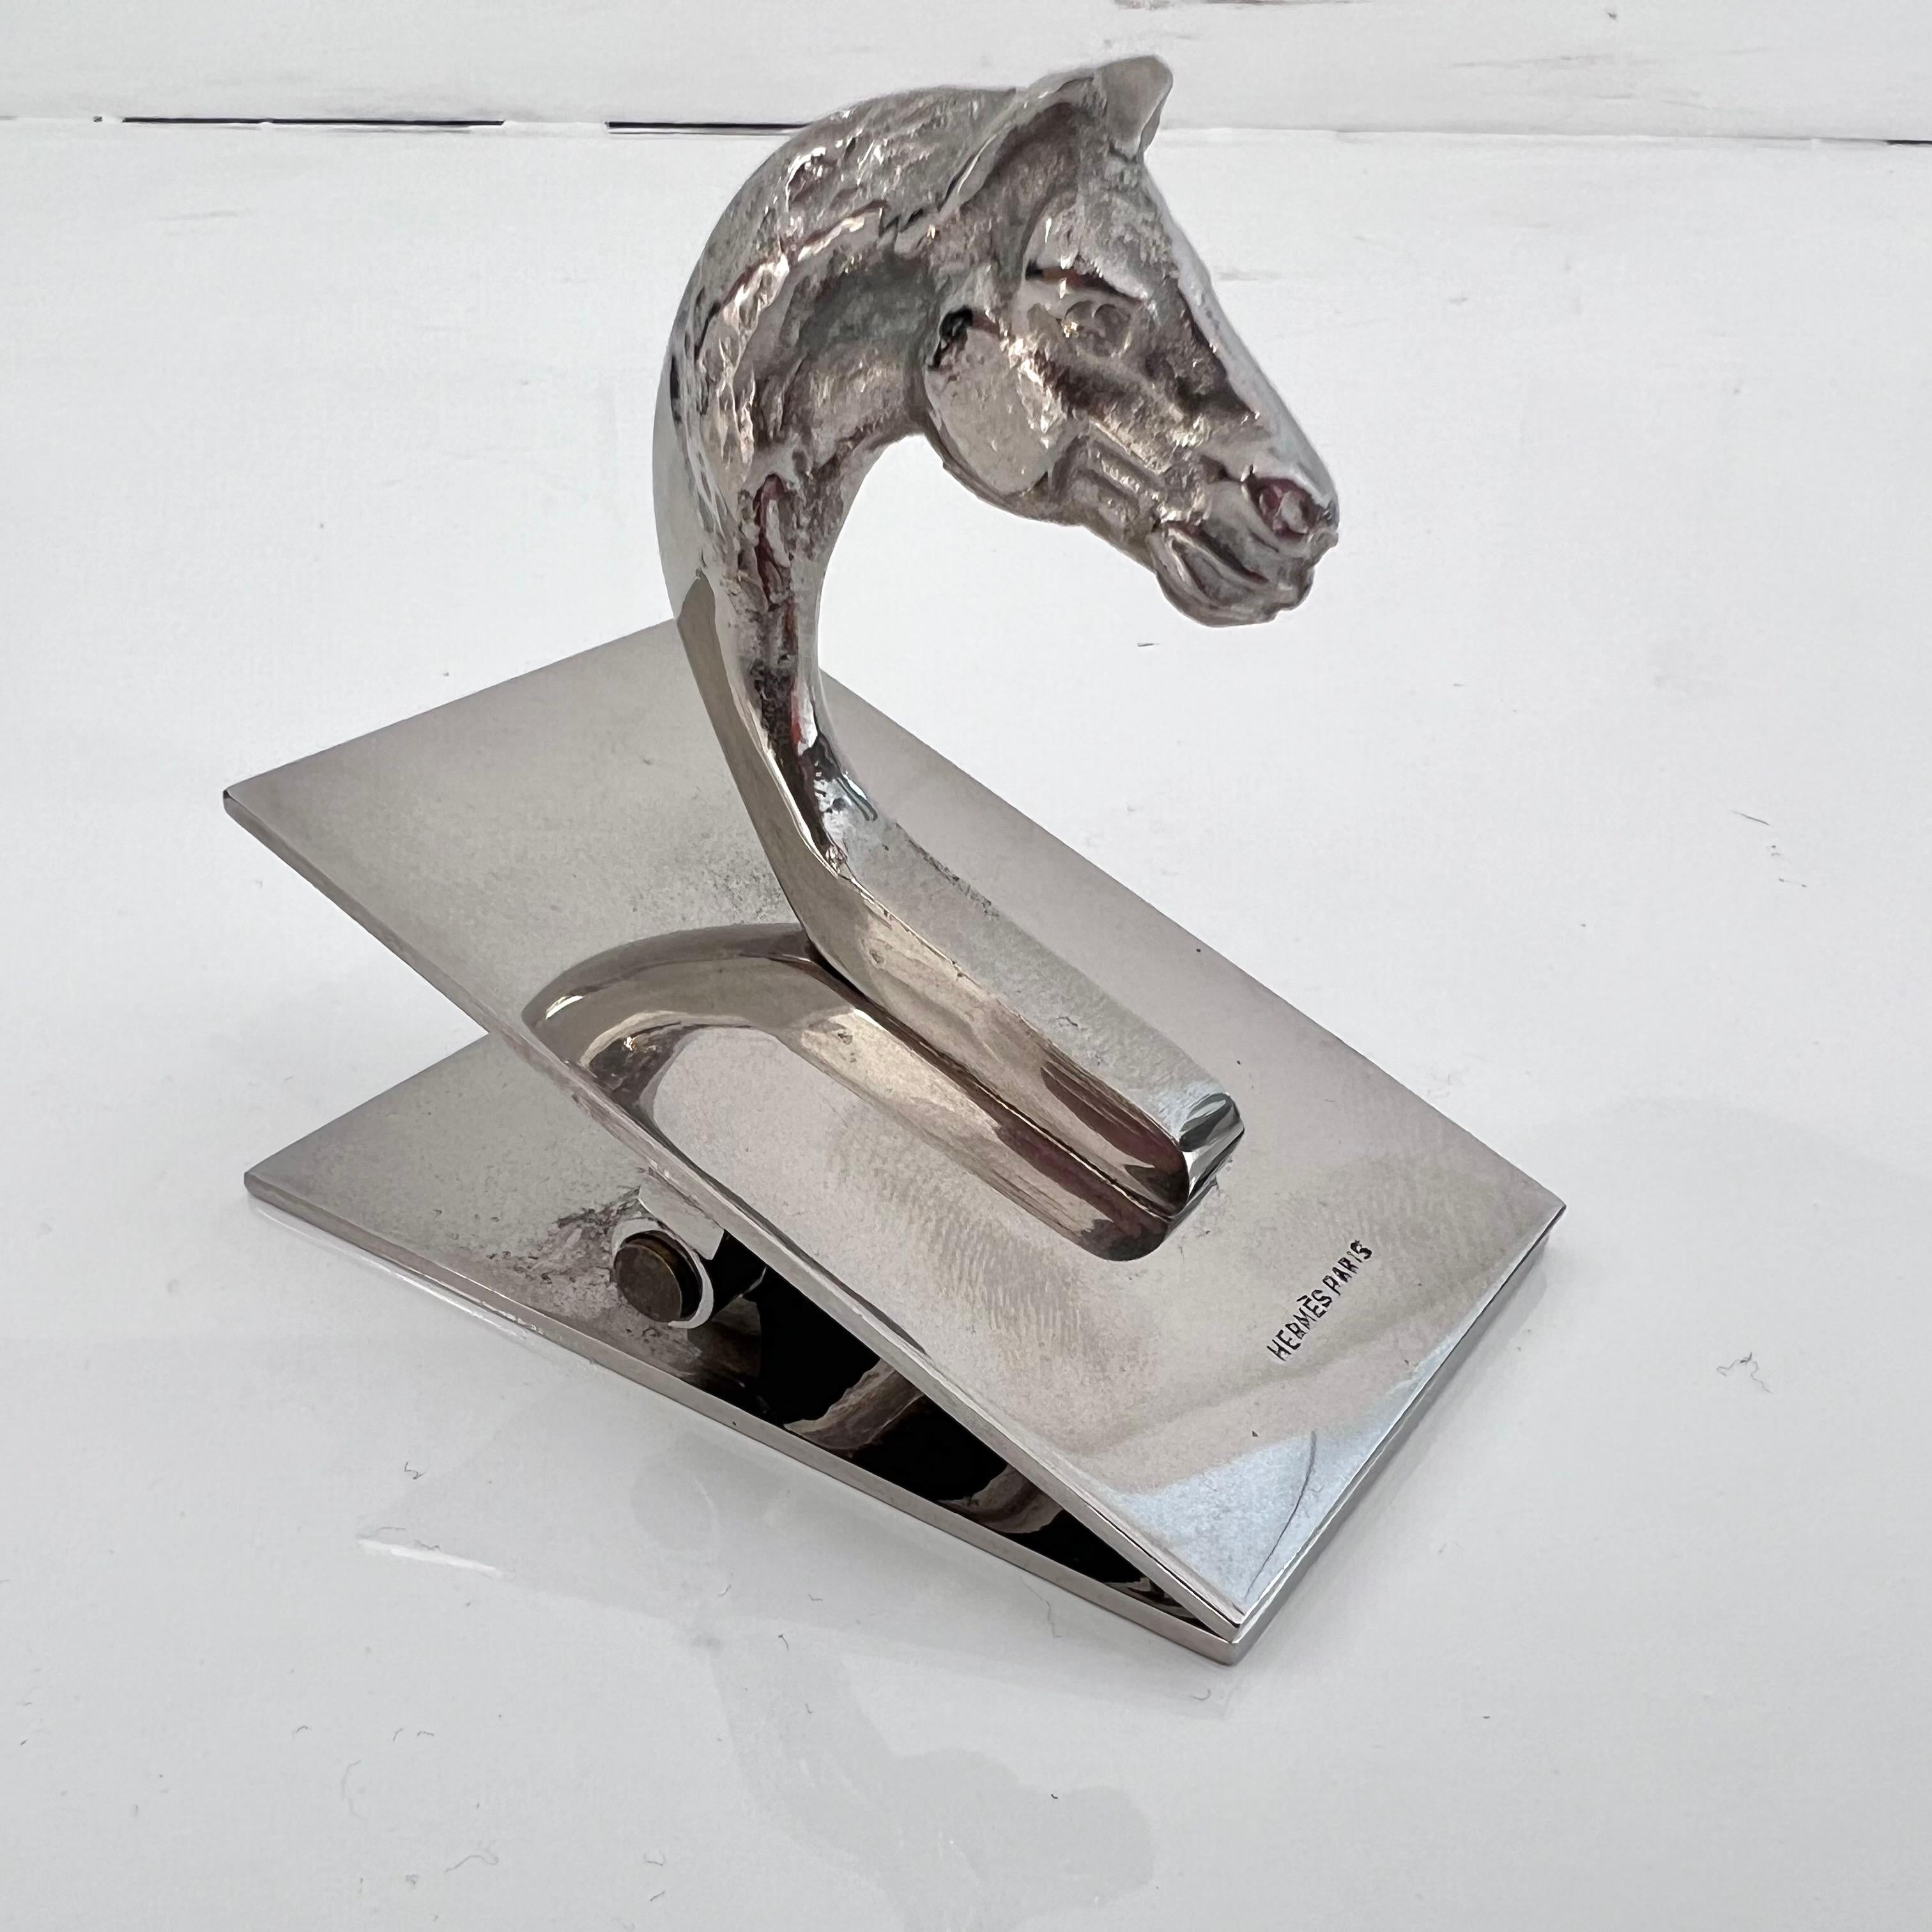 Substantial Hermès paper clip with a detailed horse head handle in solid metal. Hermès Paris stamped on the top. Light patina to silver. Large scale with good weight to it. Only one available. Beautiful tabletop piece. Great piece of collectible